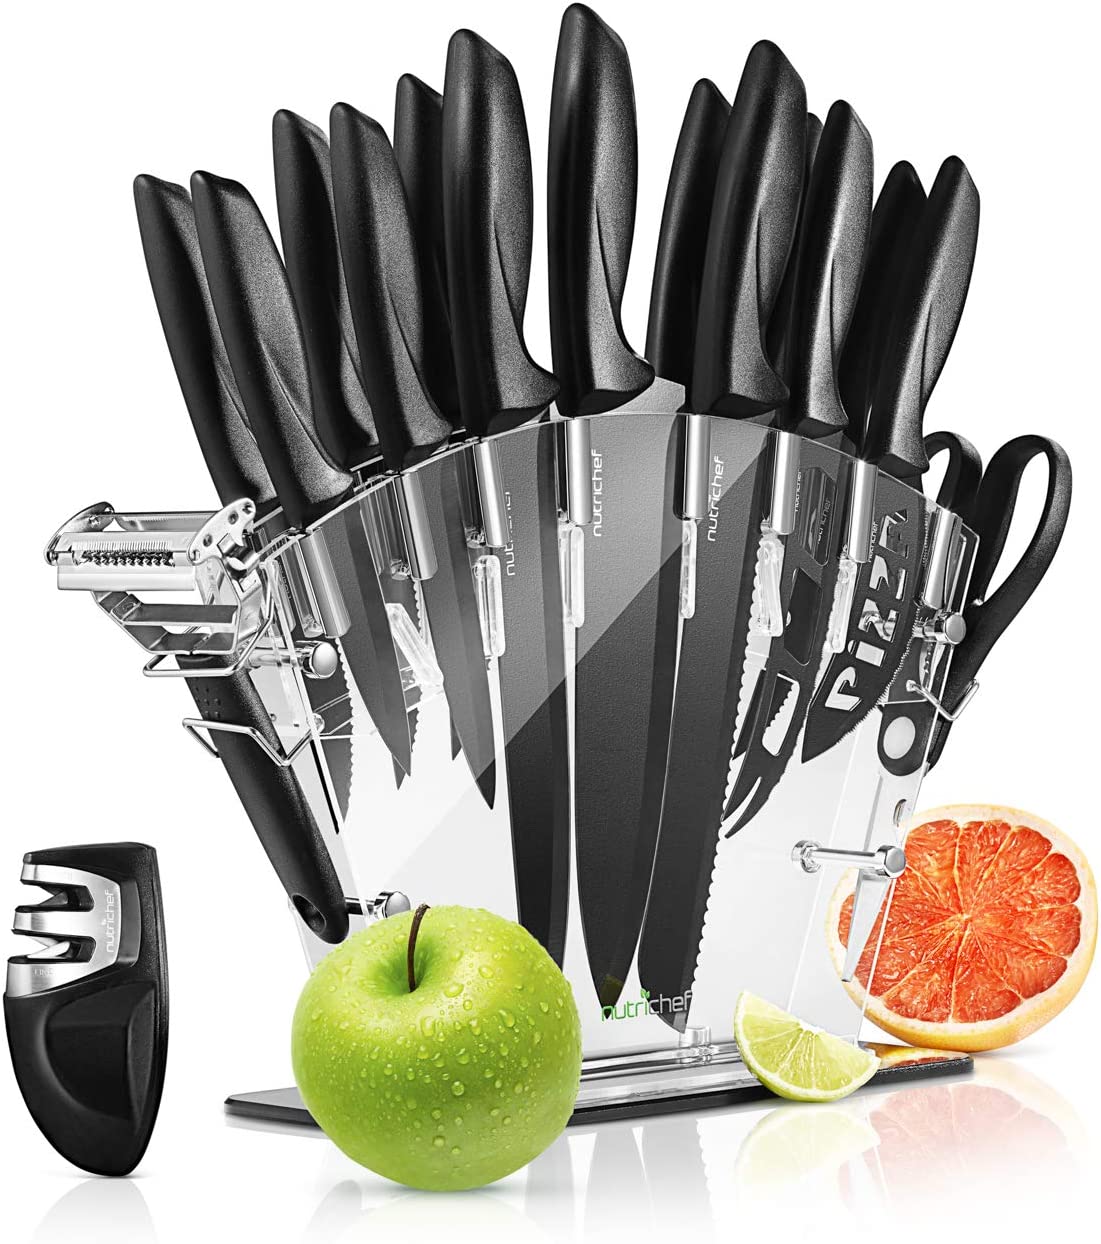 17 Piece Knife Set with Block and Sharpener